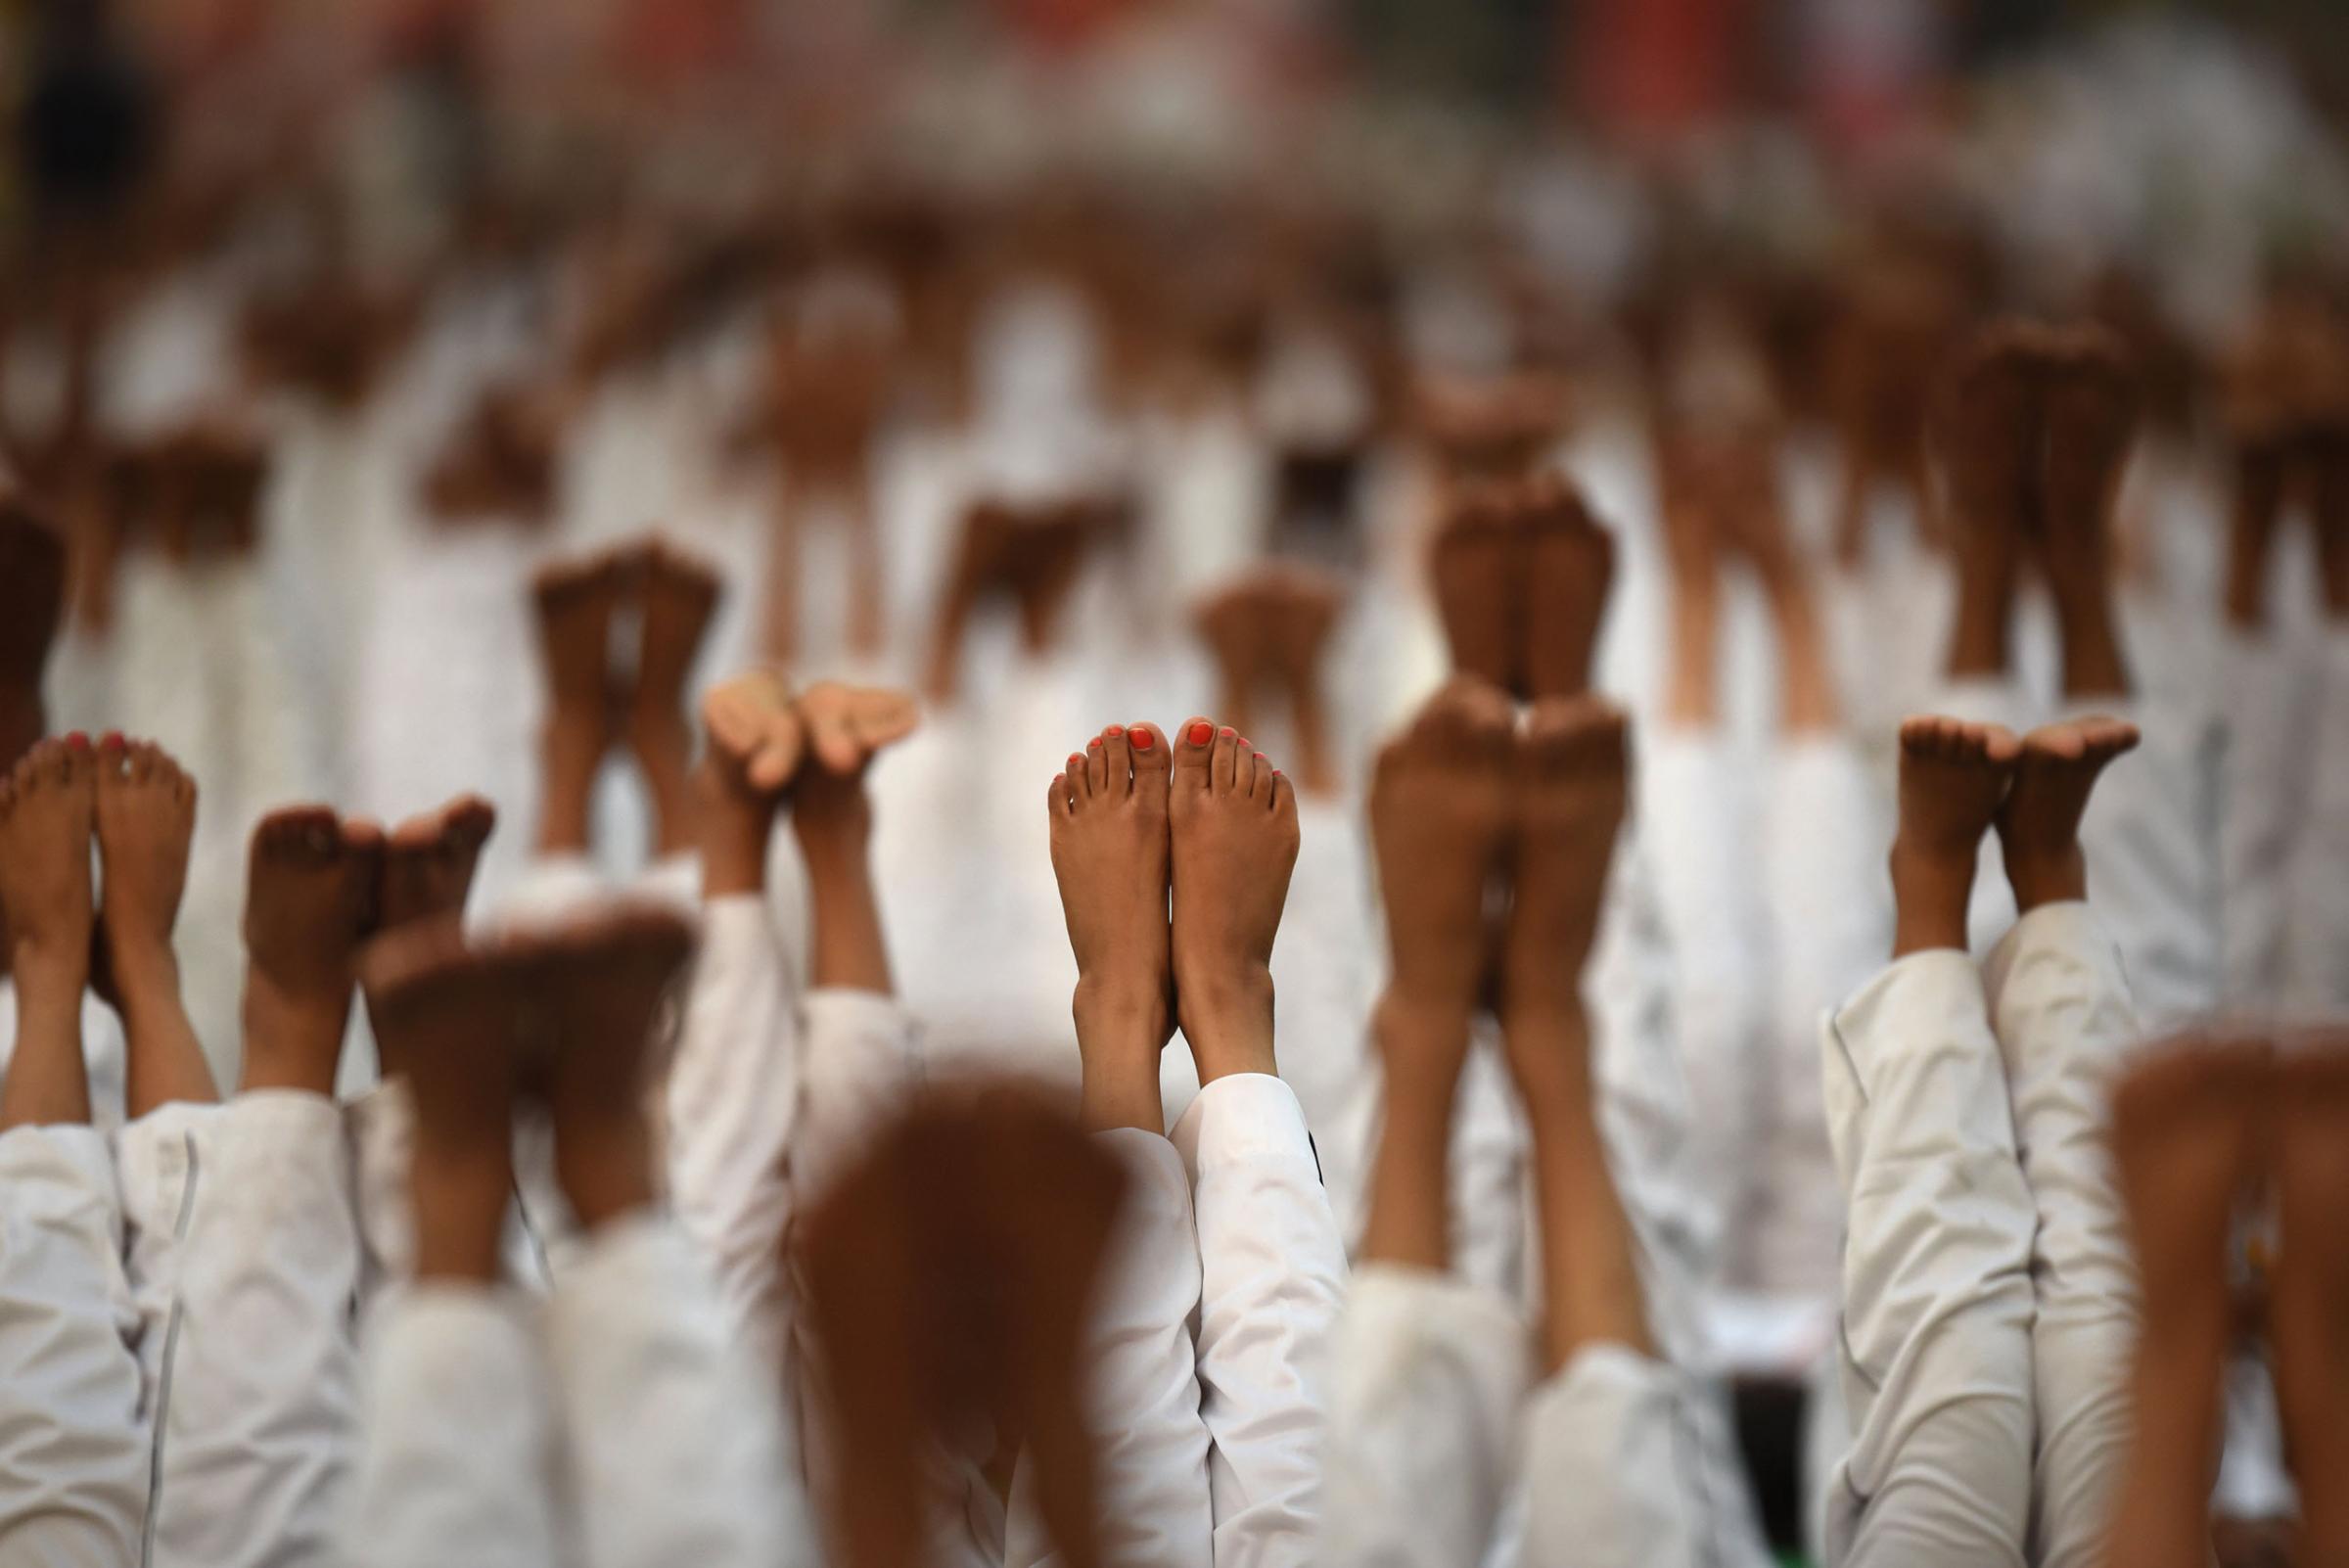 Participants perform Yoga during the rehearsals for the upcoming International Yoga Day at Rajpath in New Delhi, India, on June 19, 2016.